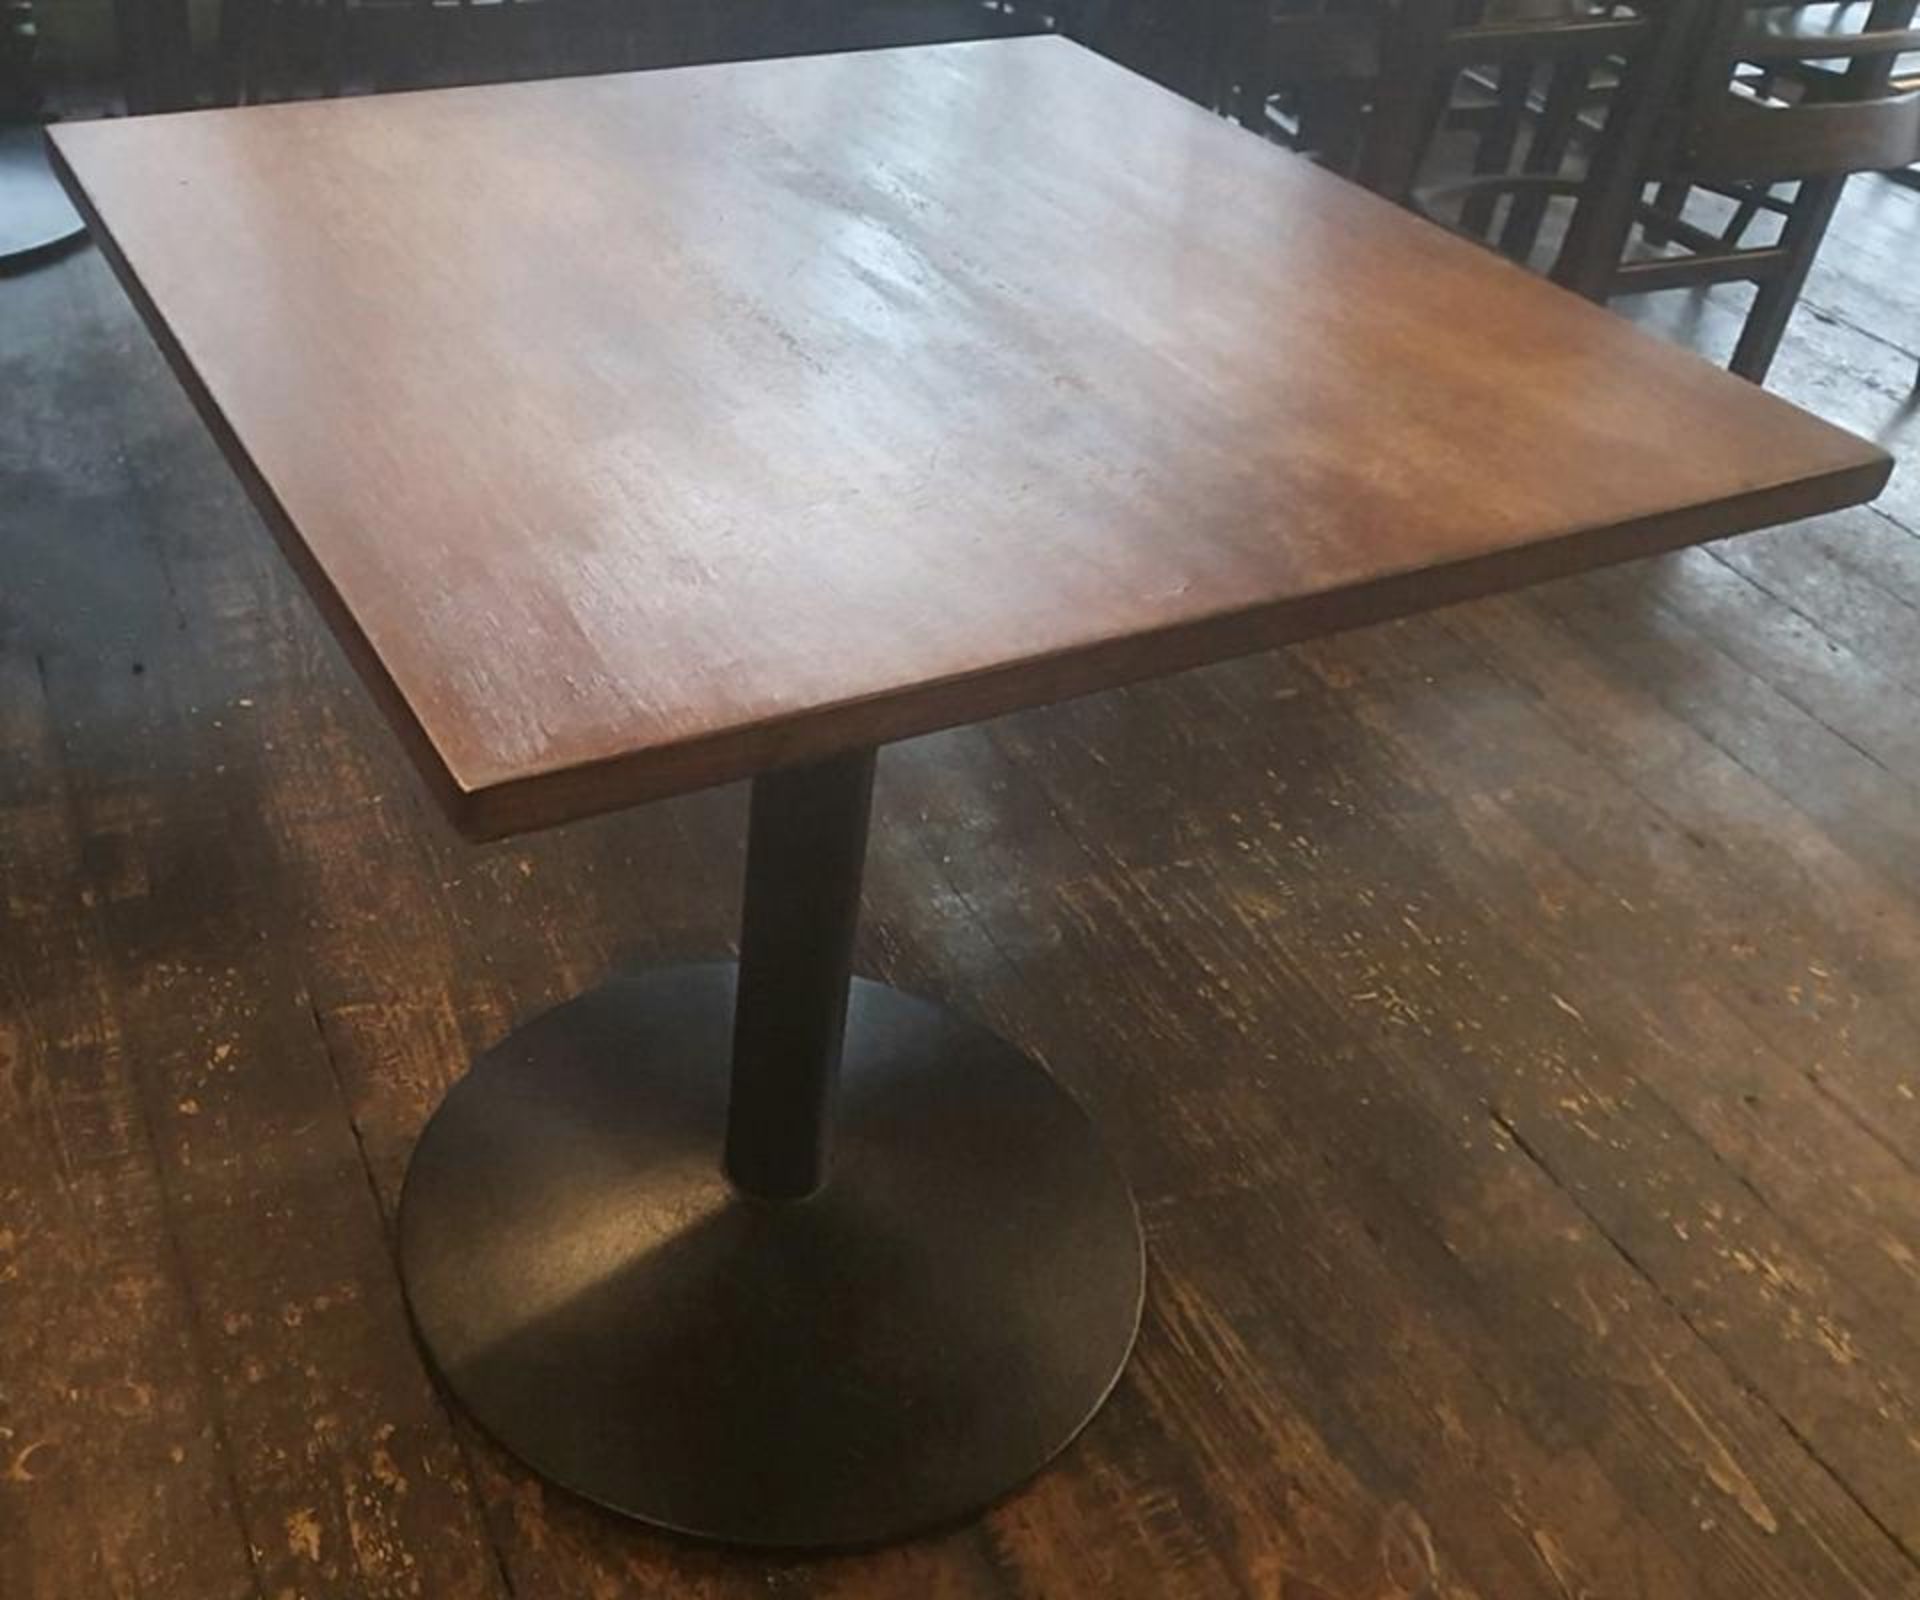 5 x Bistro Dining Tables - Dimensions: 70 x 70 x H74cm - Recently Taken From A Contemporary Caribbea - Image 3 of 5